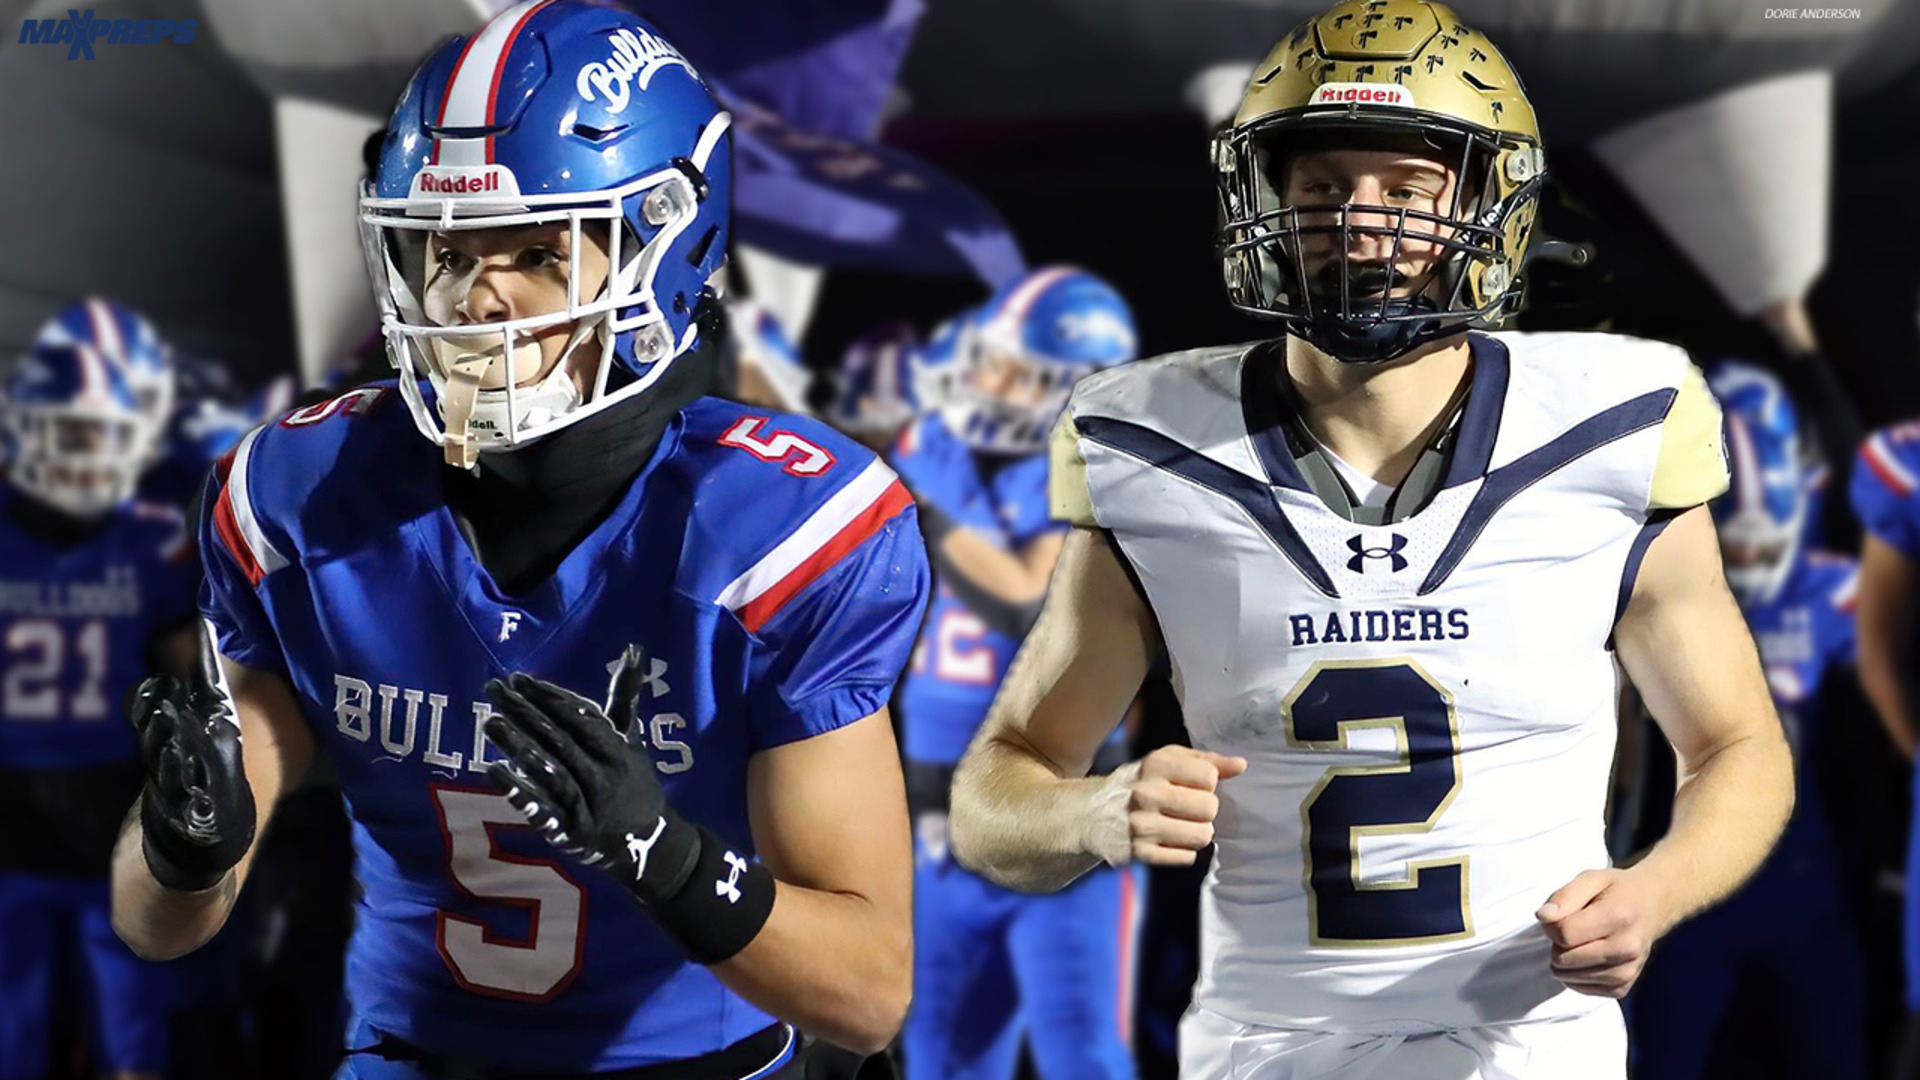 HIGHLIGHTS: Folsom Stays Dominant in the Playoffs vs Central Catholic